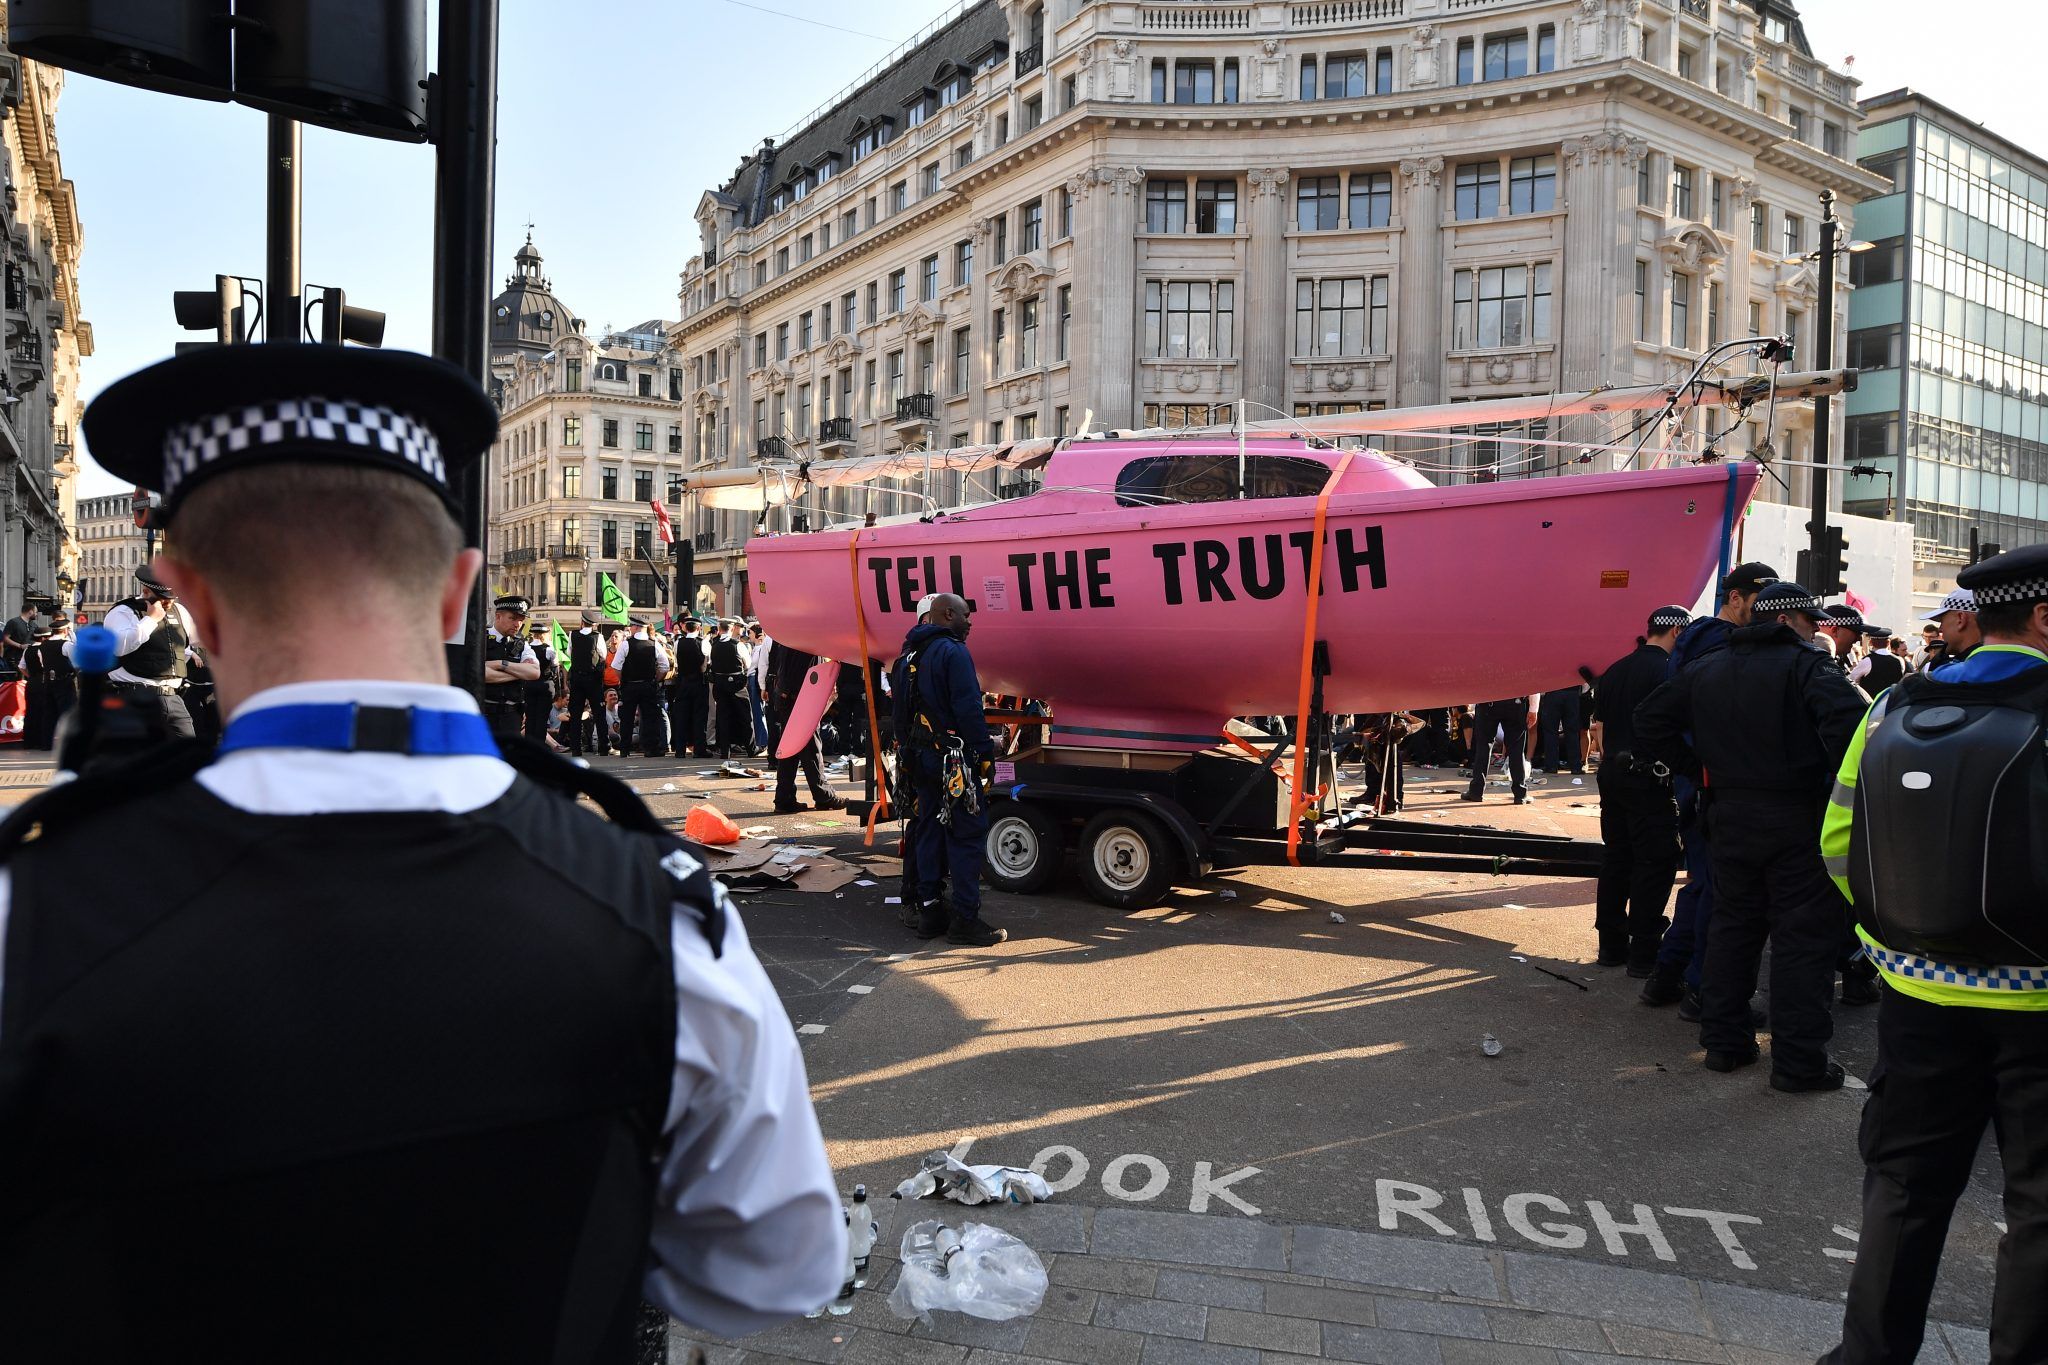 Police officers continue to clear Oxford Circus of protesters and dismantle a pink ship that formed the centerpiece of the demonstrations during the fifth day of a coordinated protest by the Extinction Rebellion group on April 19, 2019 in London, England. The environmental campaign group has blocked a number of key junctions in central London and have threatened to disrupt Heathrow airport, in a bid to highlight the ongoing ecological crisis. (Photo by Leon Neal/Getty Images)